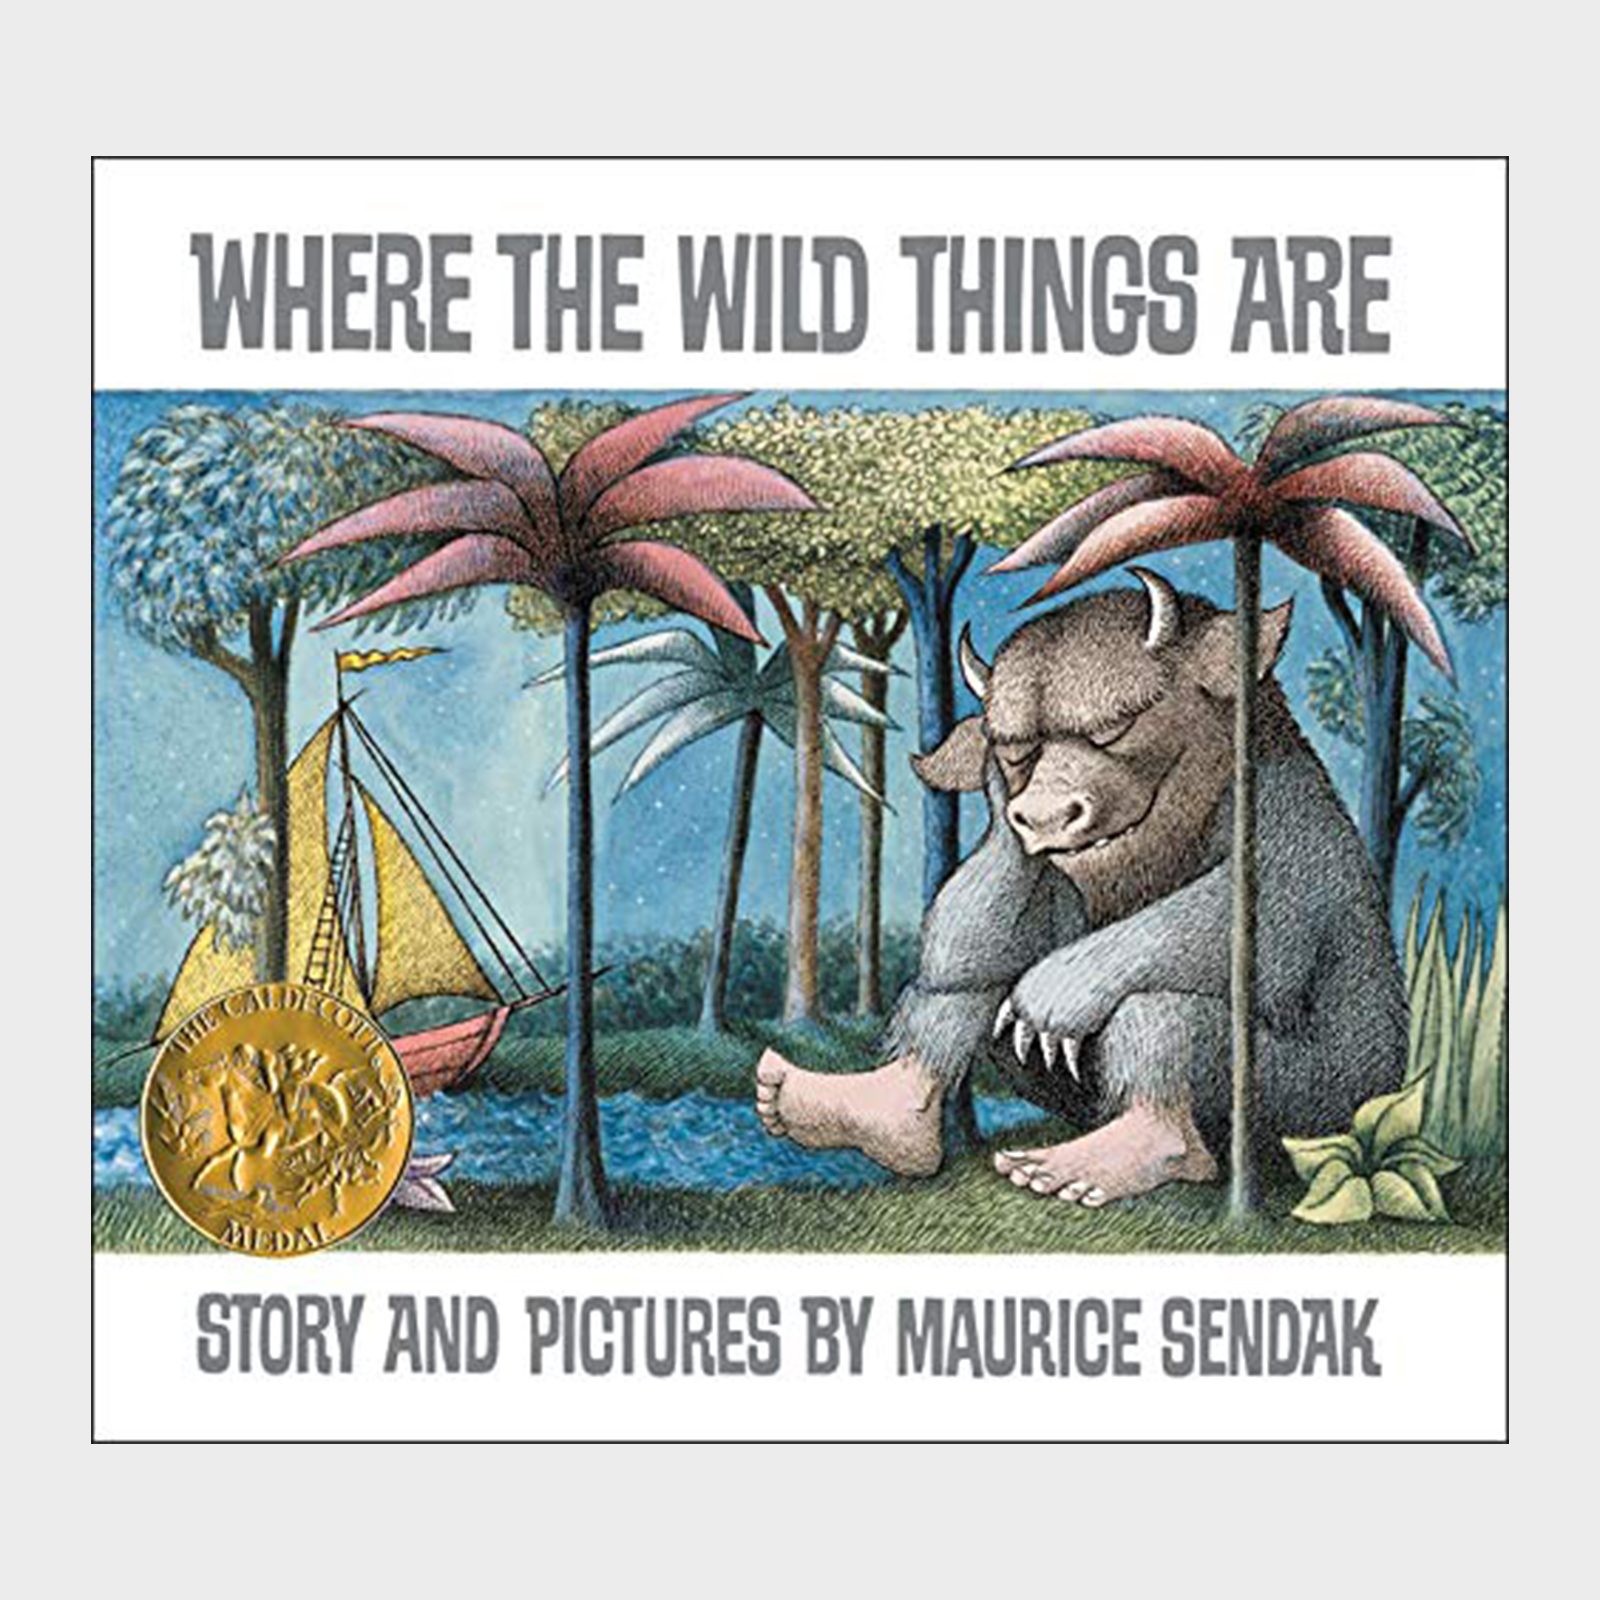 Where the Wild Things Are by Maurice Sendak Children's book